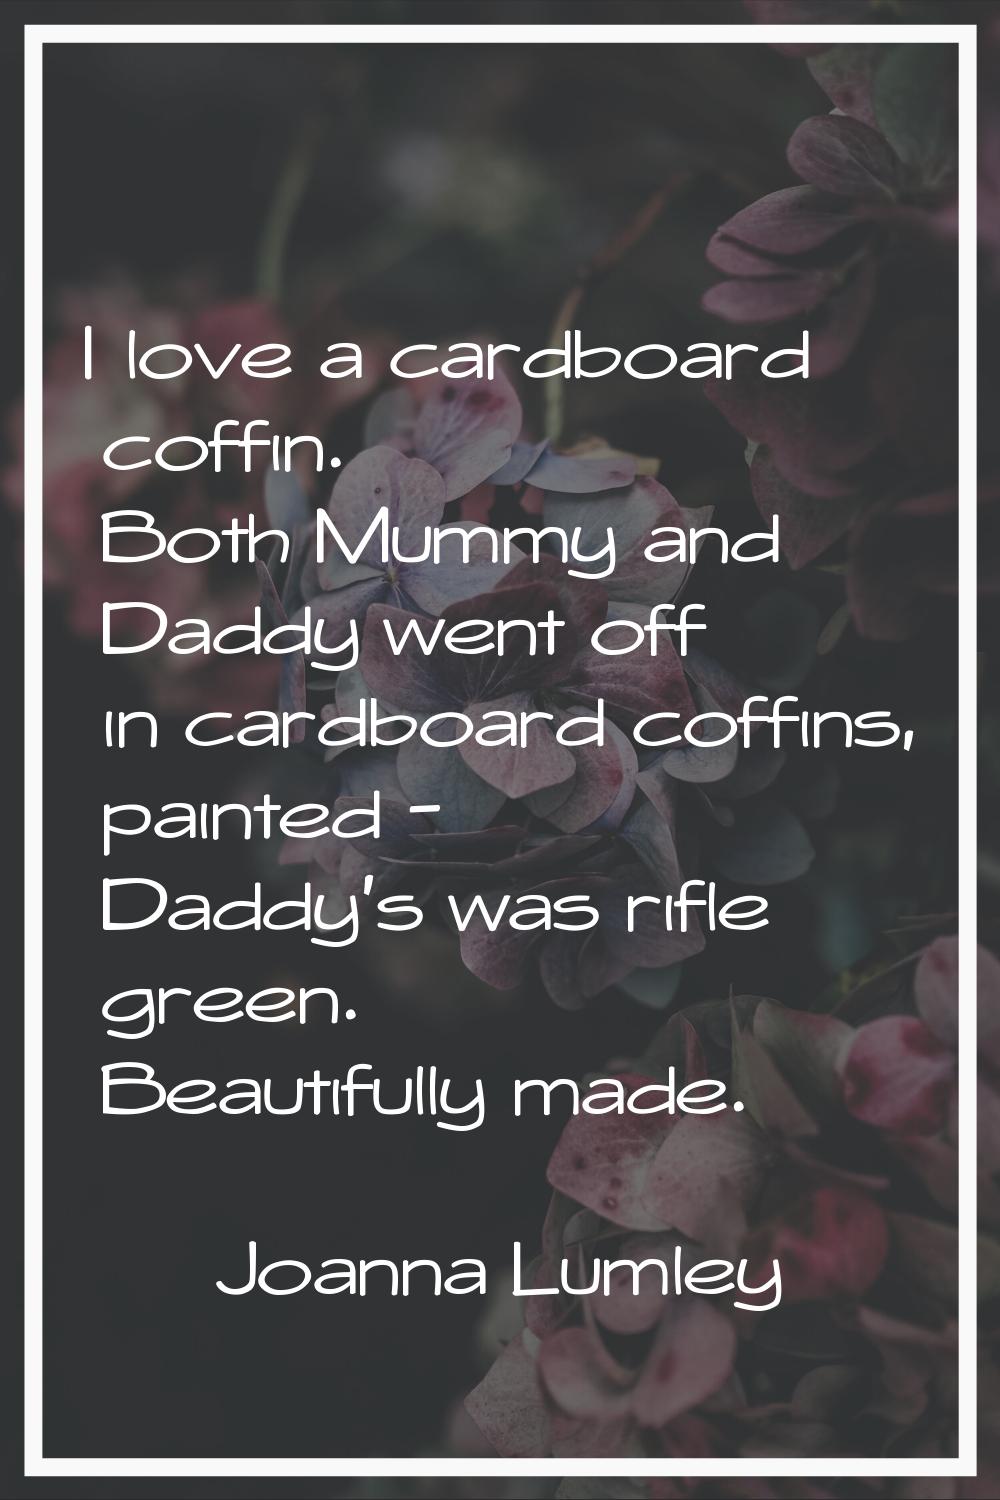 I love a cardboard coffin. Both Mummy and Daddy went off in cardboard coffins, painted - Daddy's wa